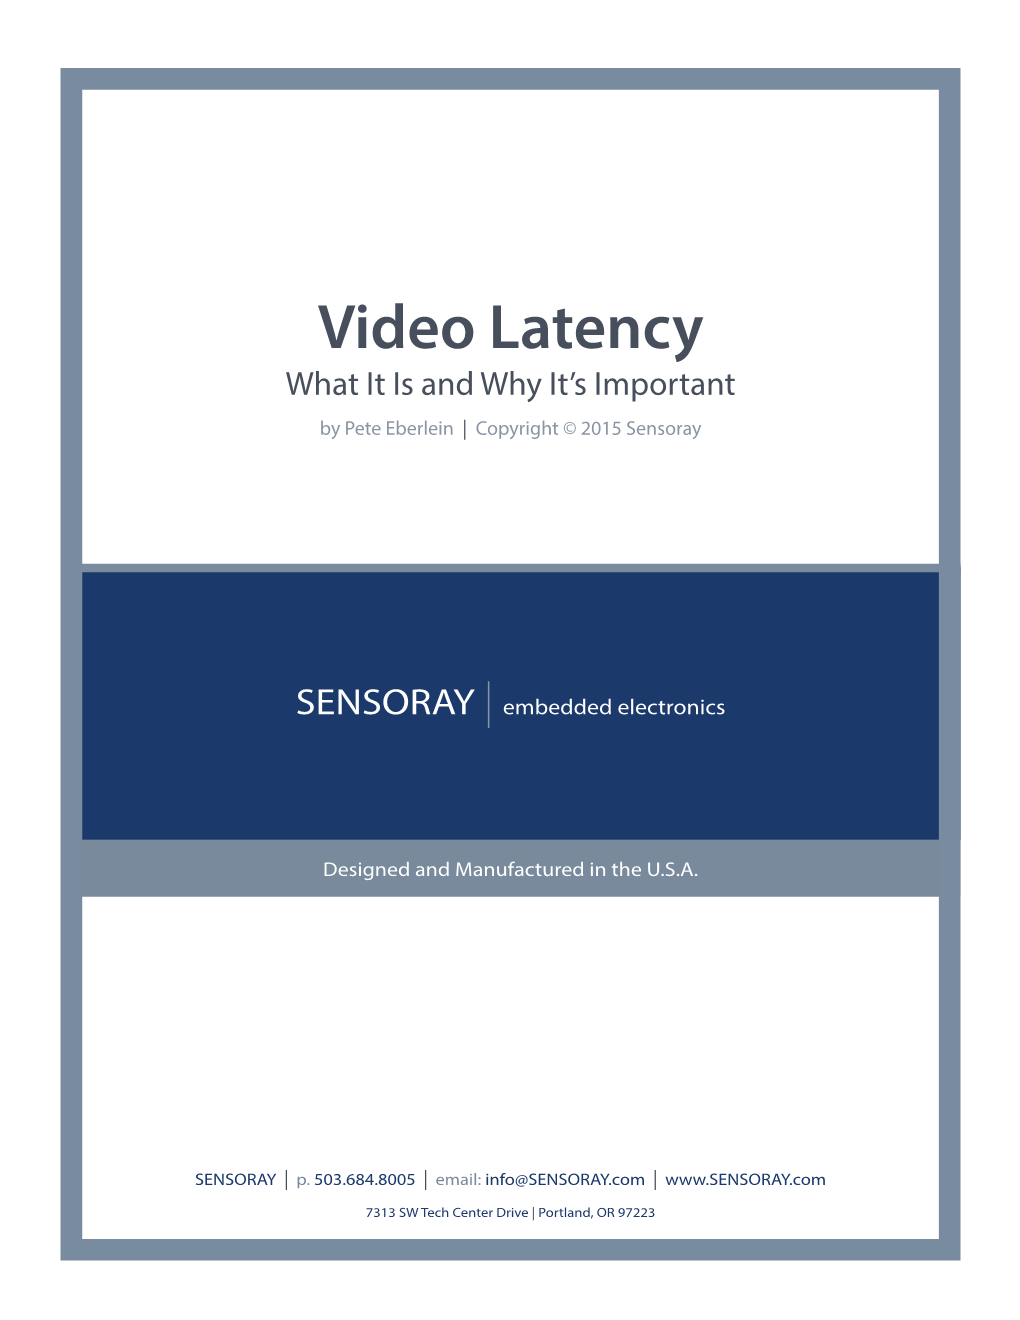 Video Latency What It Is and Why It’S Important by Pete Eberlein | Copyright © 2015 Sensoray